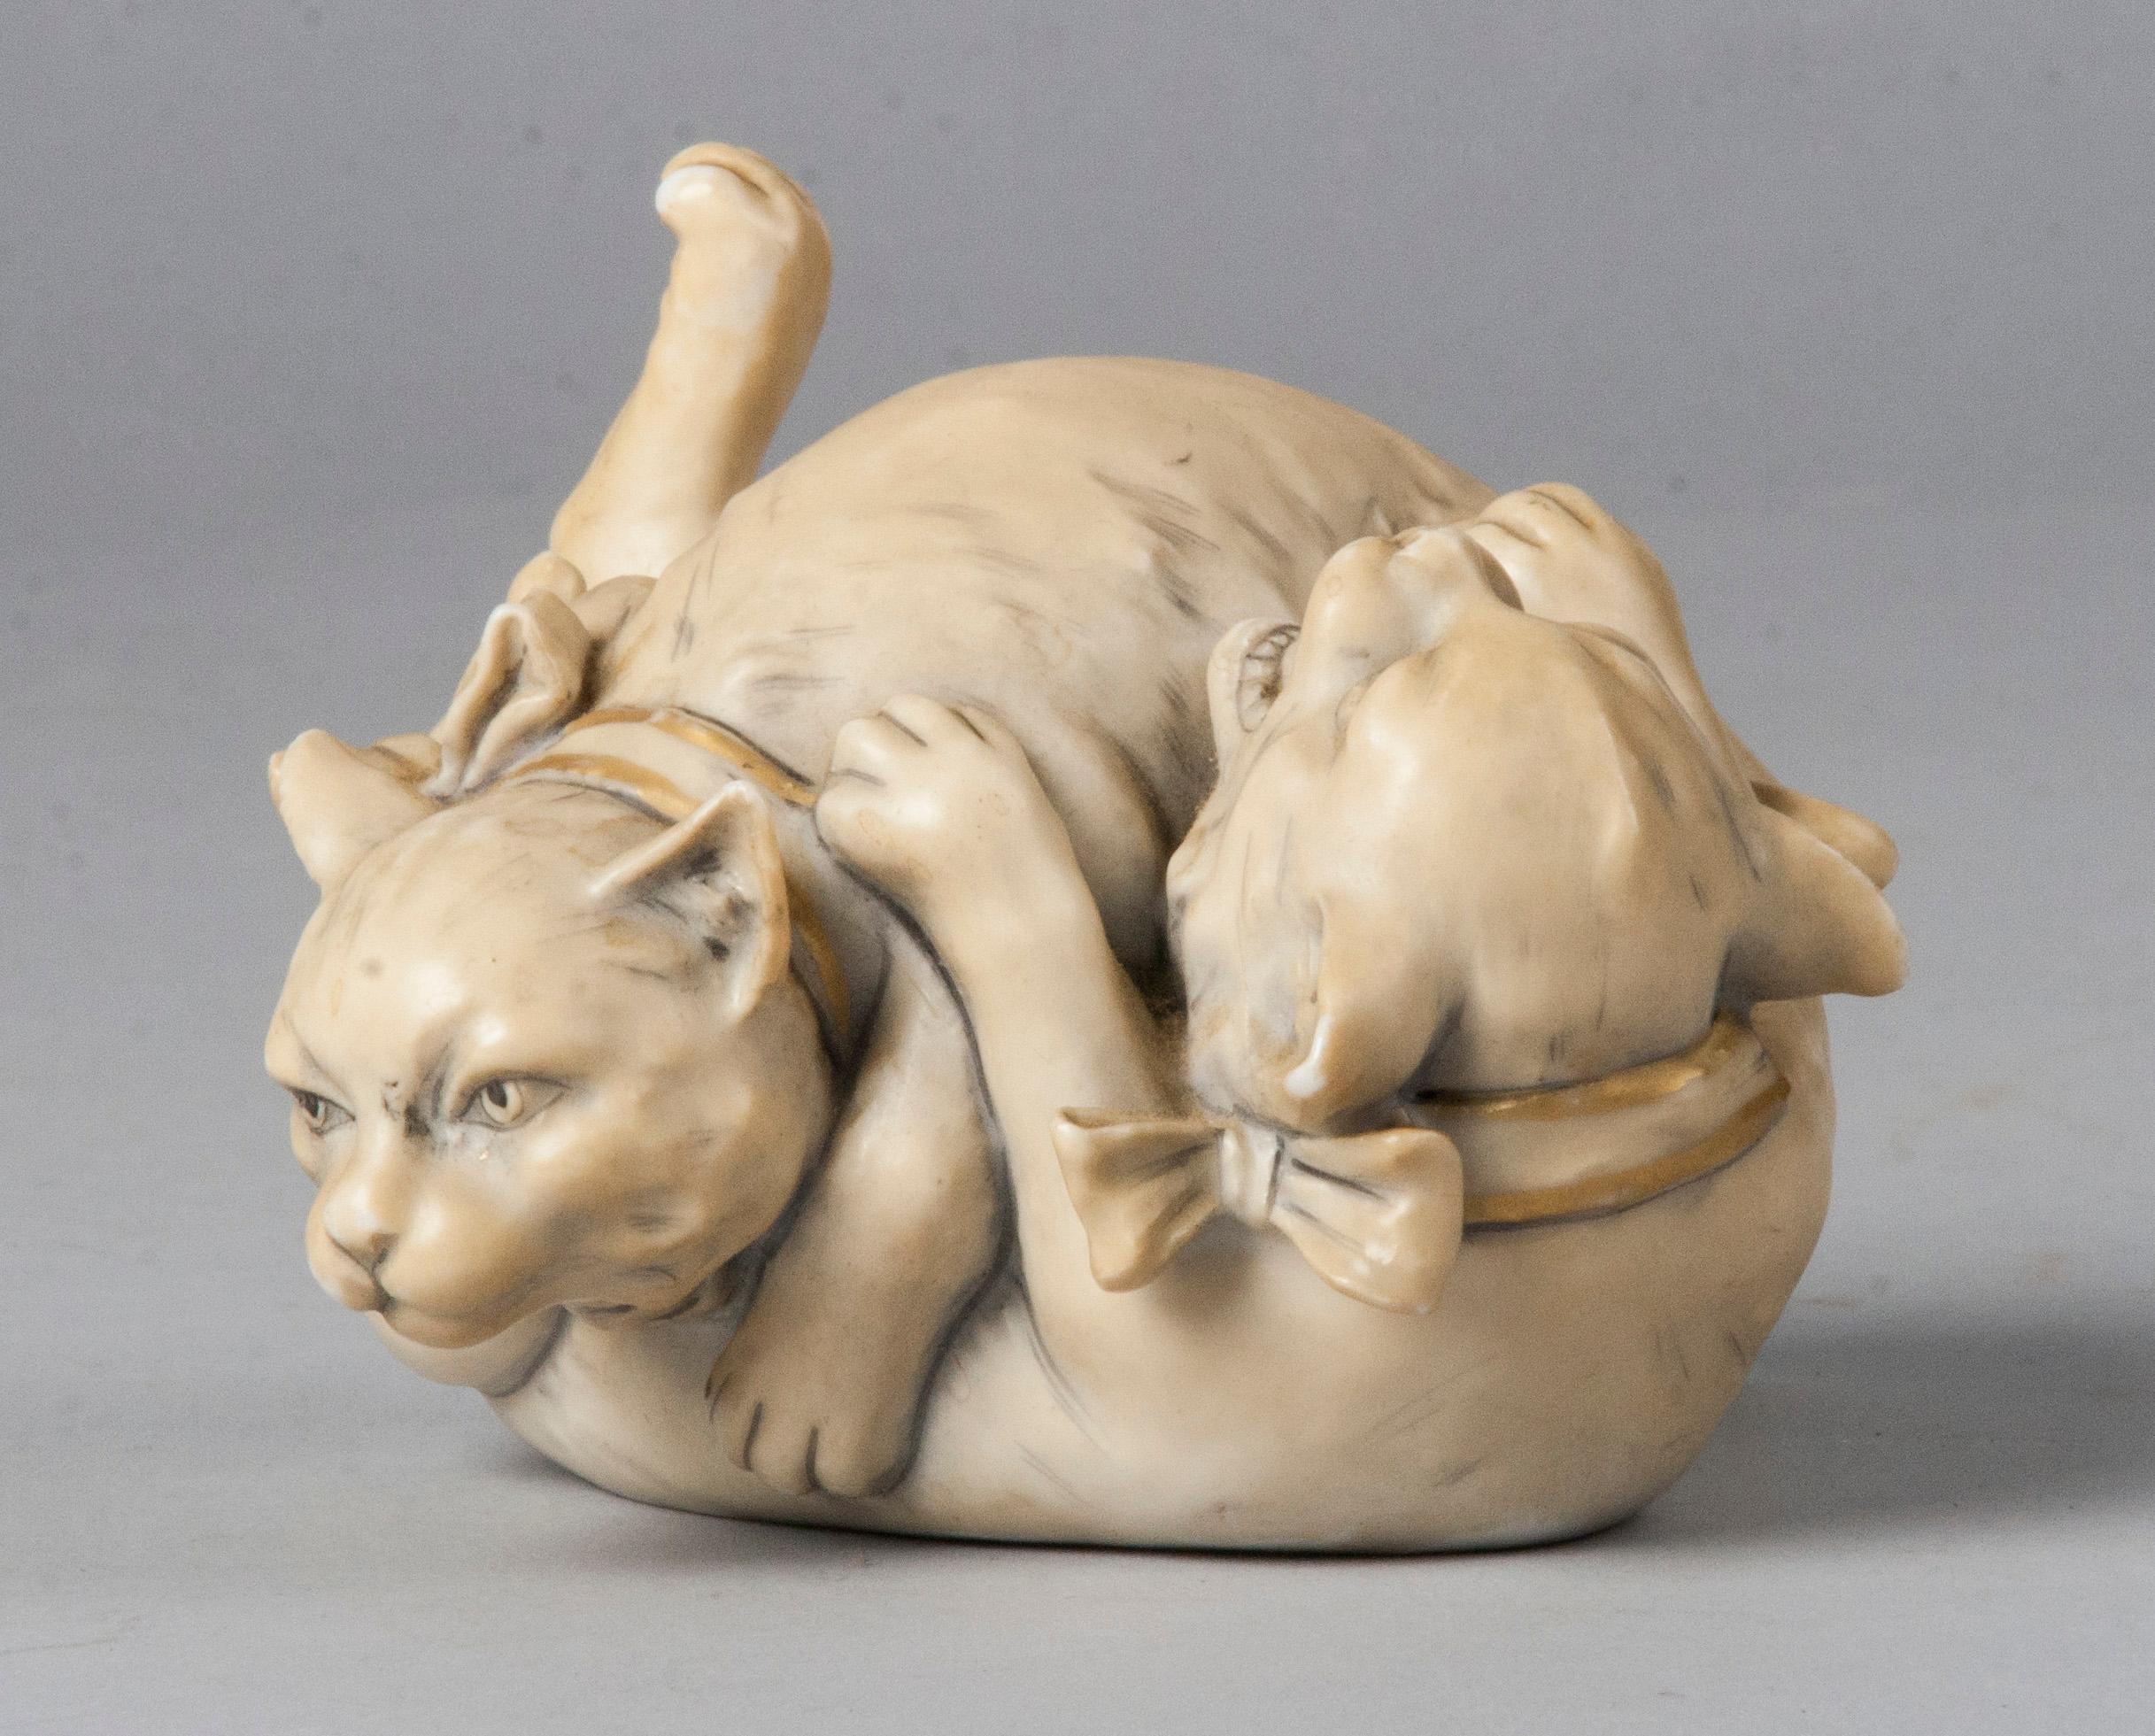 Cute small format statue made by Royal Dux, of two playing and rolling cats. The figurine has beautiful details, such as the expression of the cats and also the bows around their necks. An unusual subject for Royal Dux, because Royal Dux is best